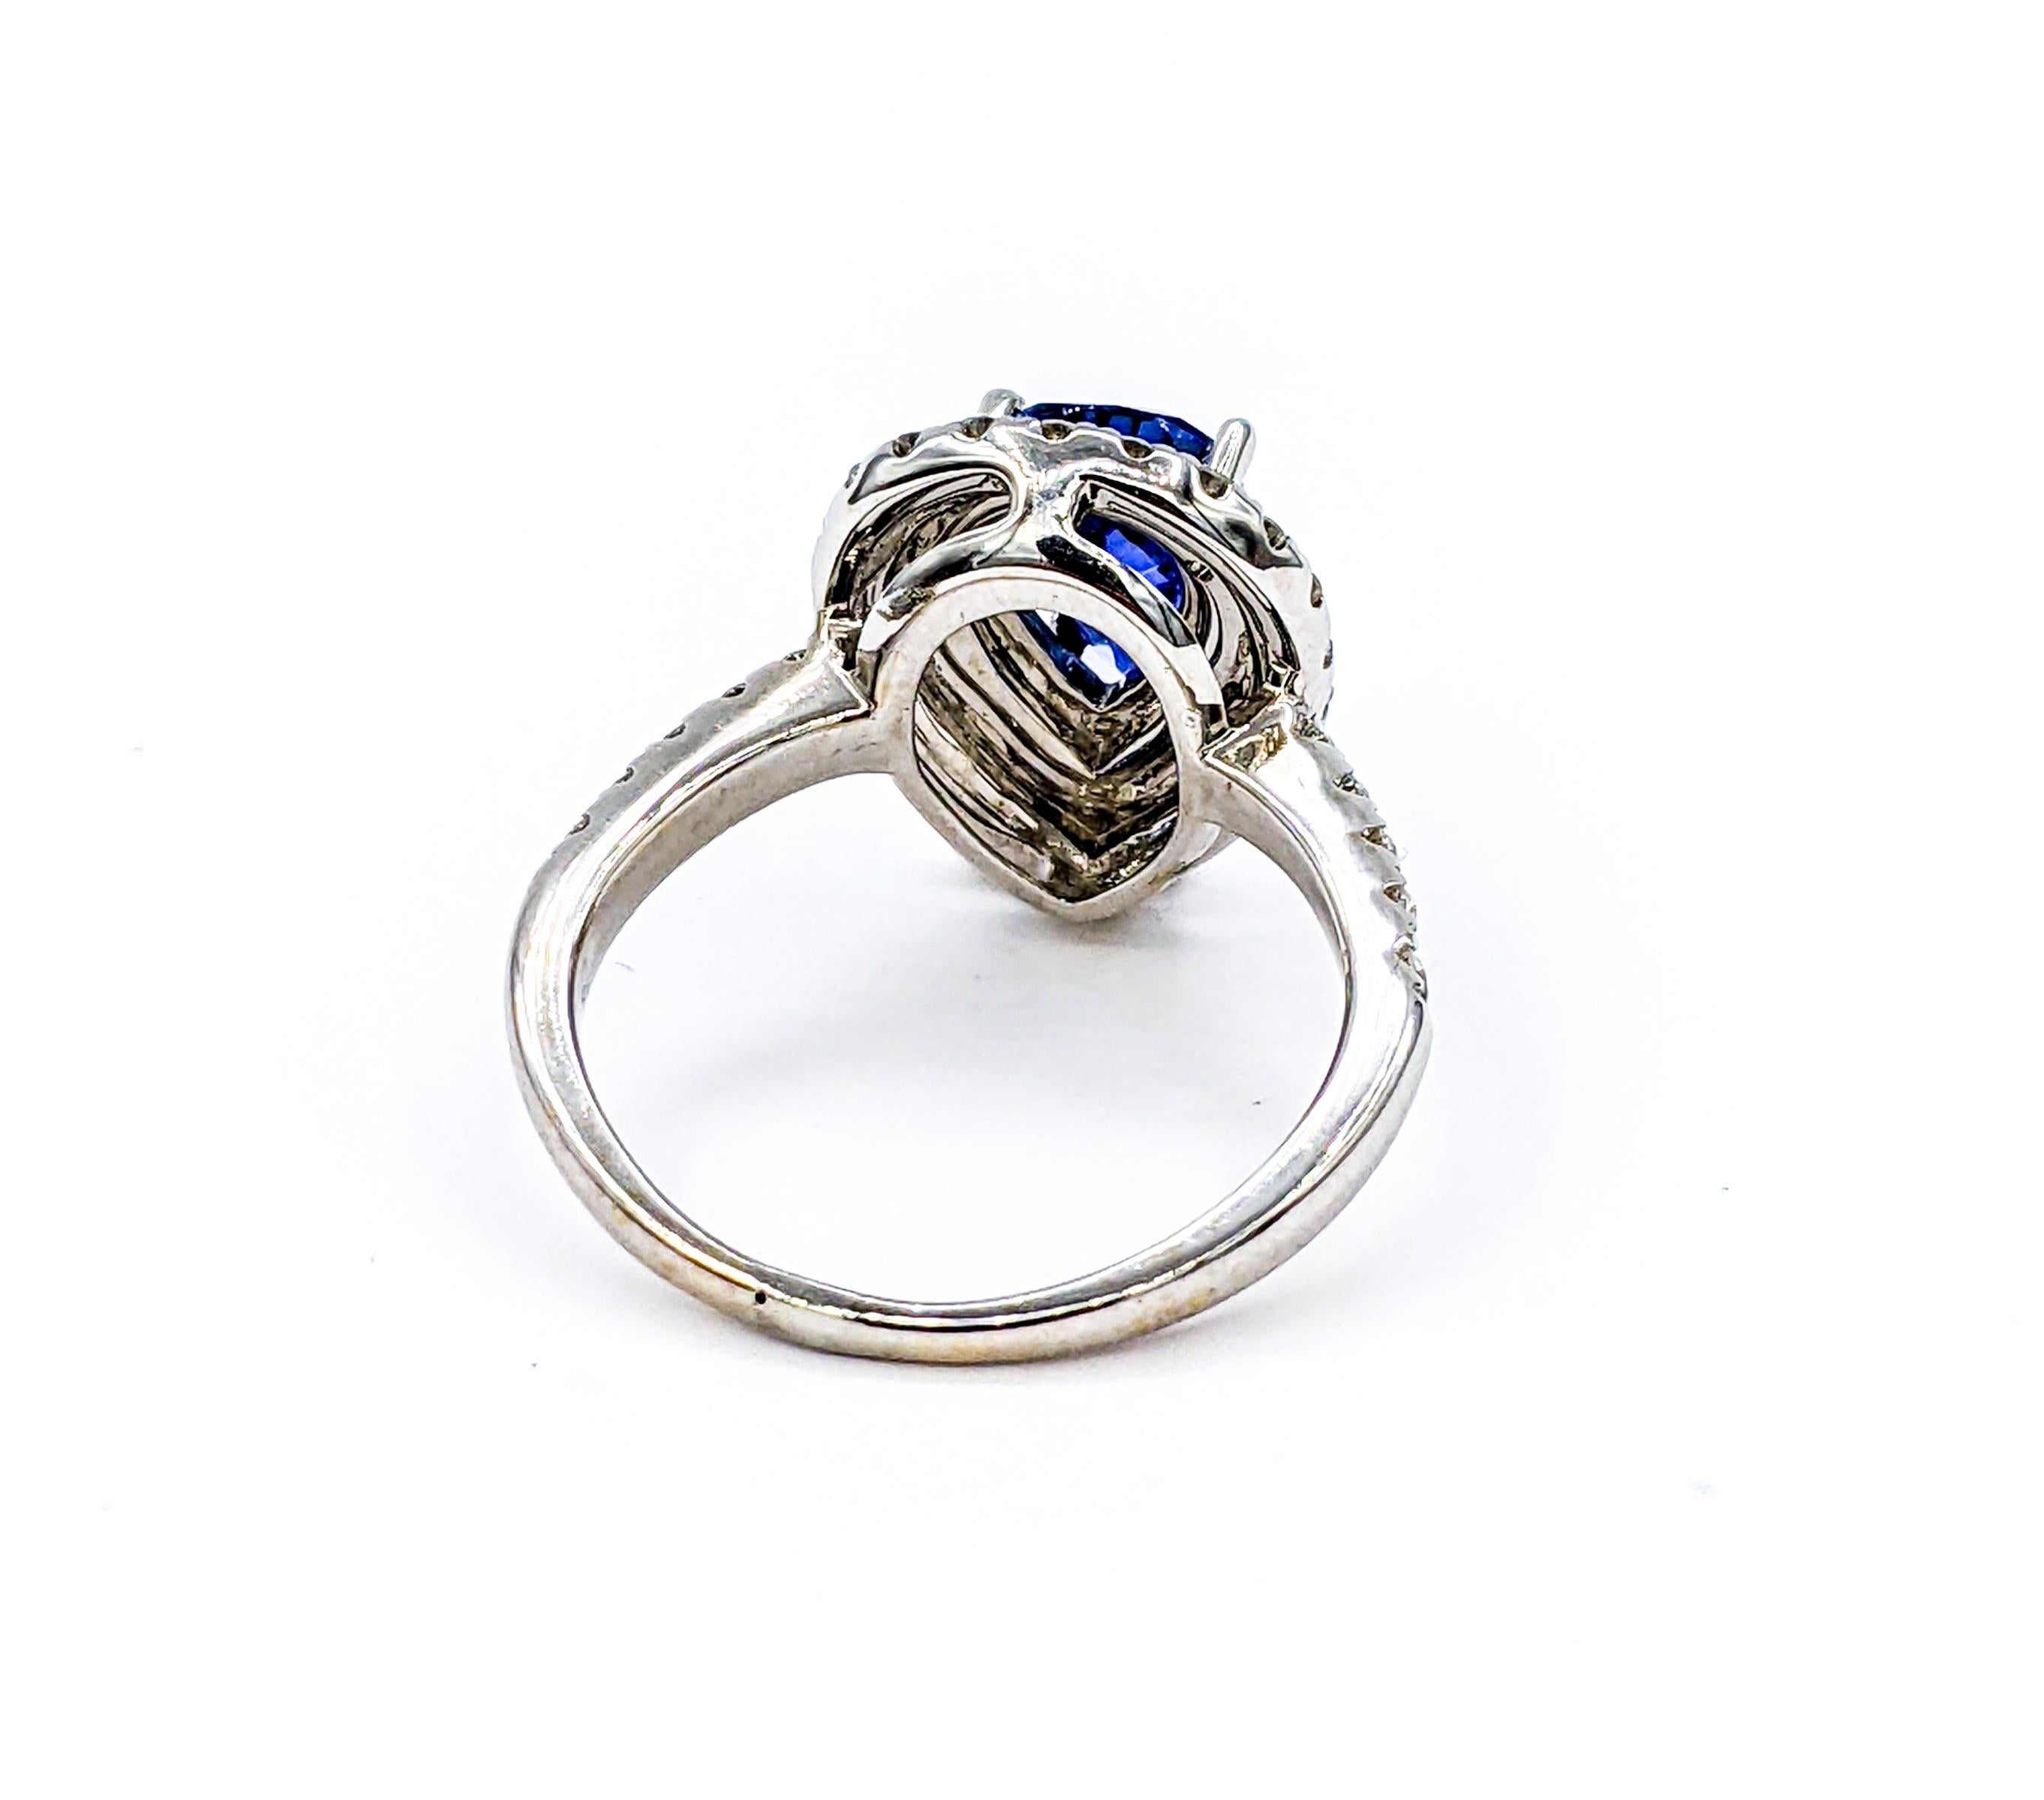 Stunning 2.00ct Sapphire & Diamond Cocktail Ring - 18K White Gold For Sale 2